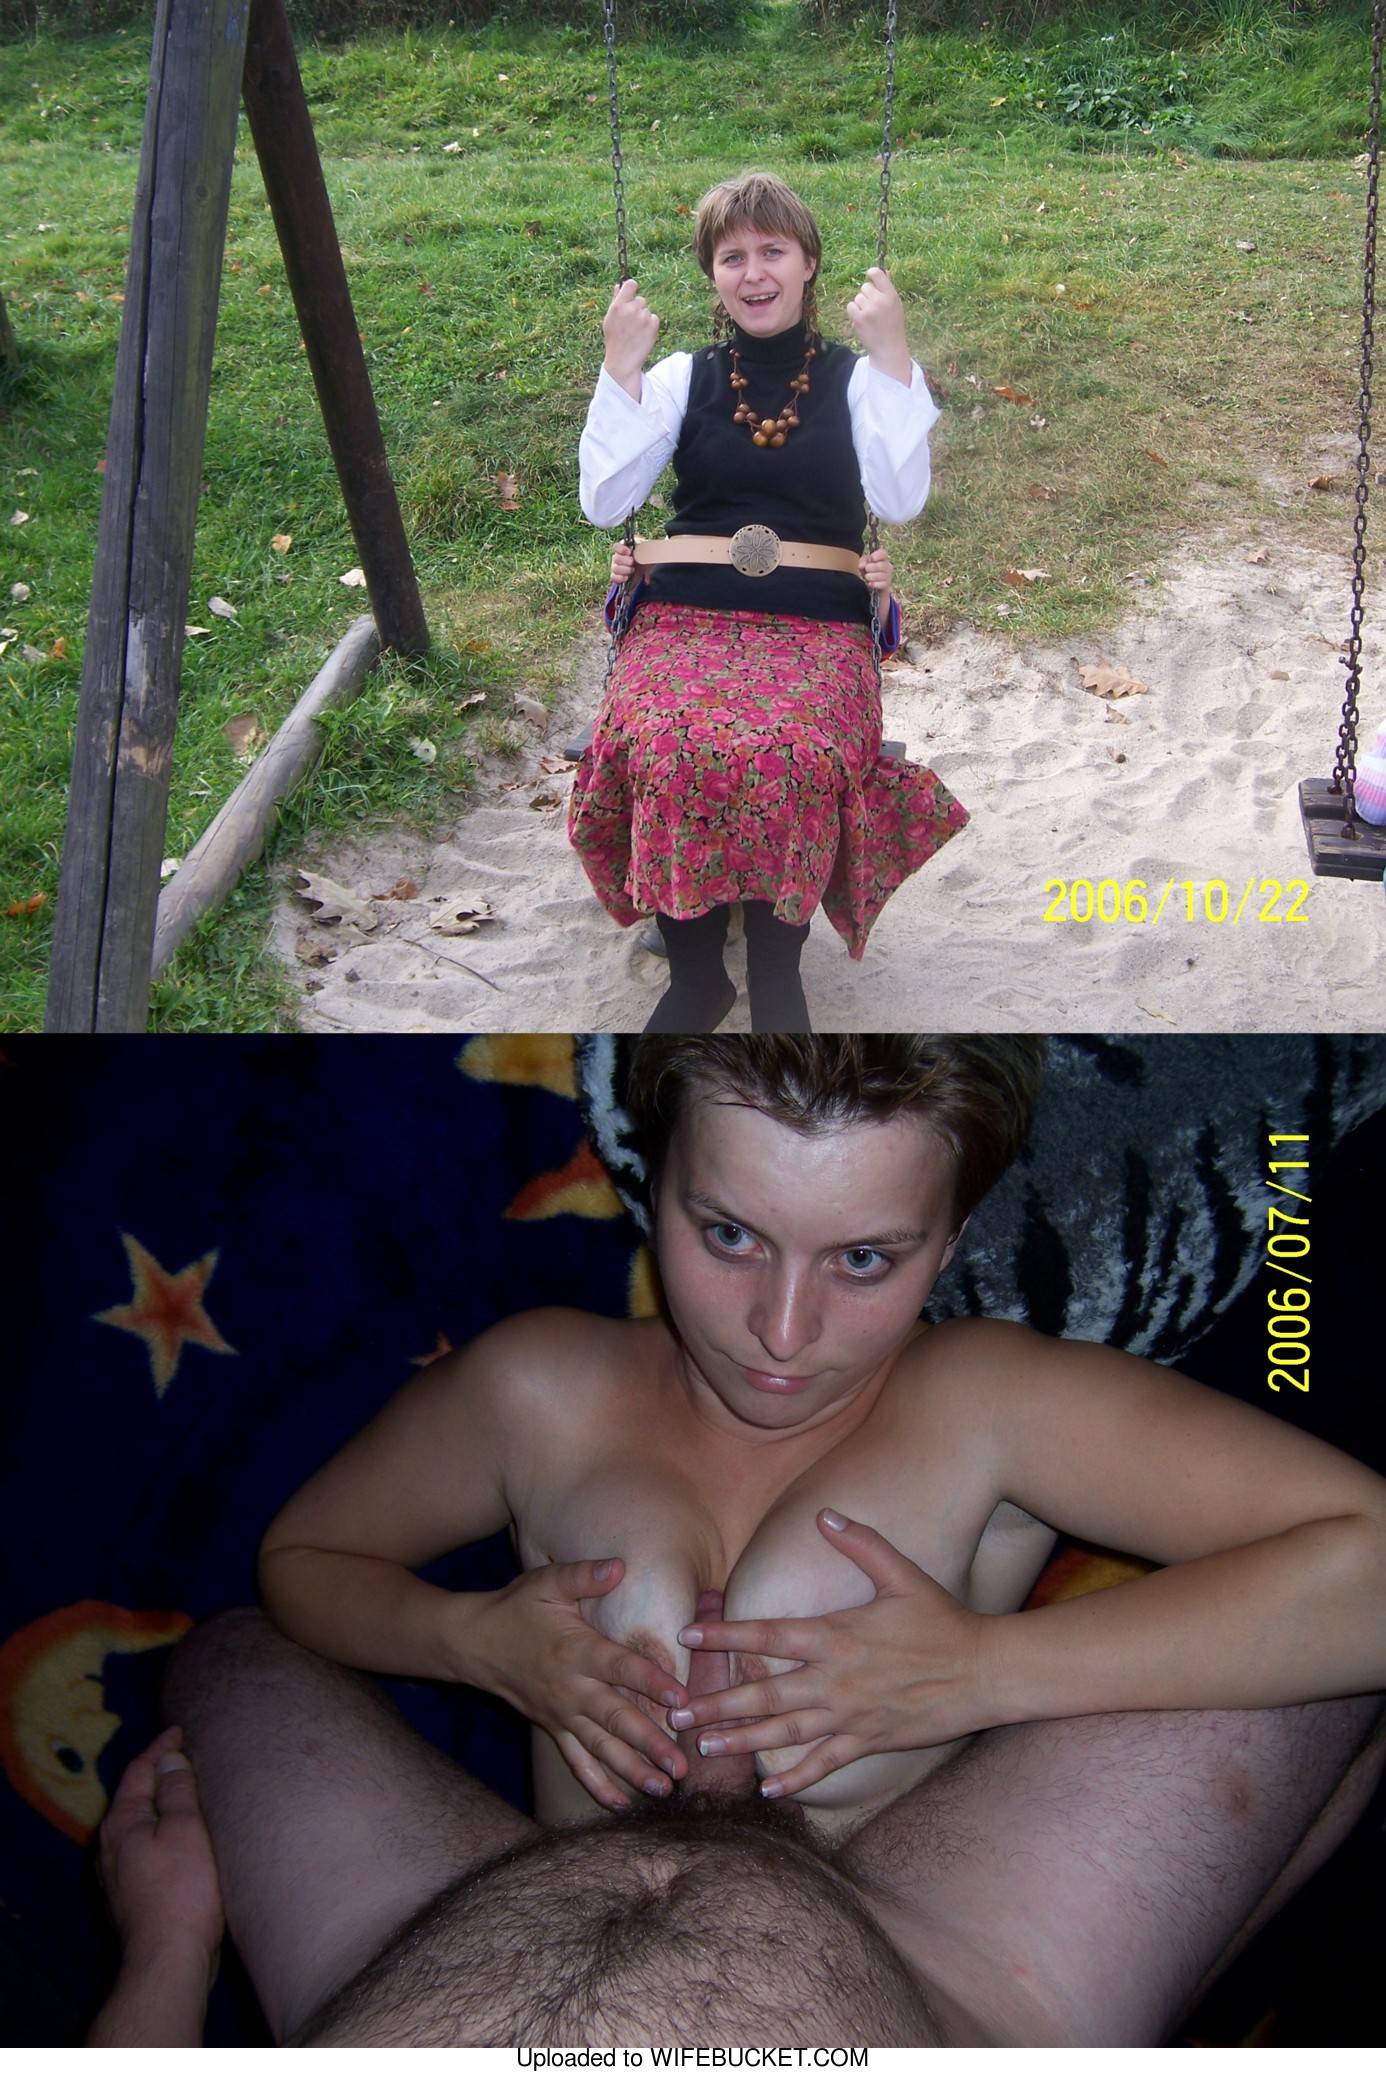 village wife before-after sex pics